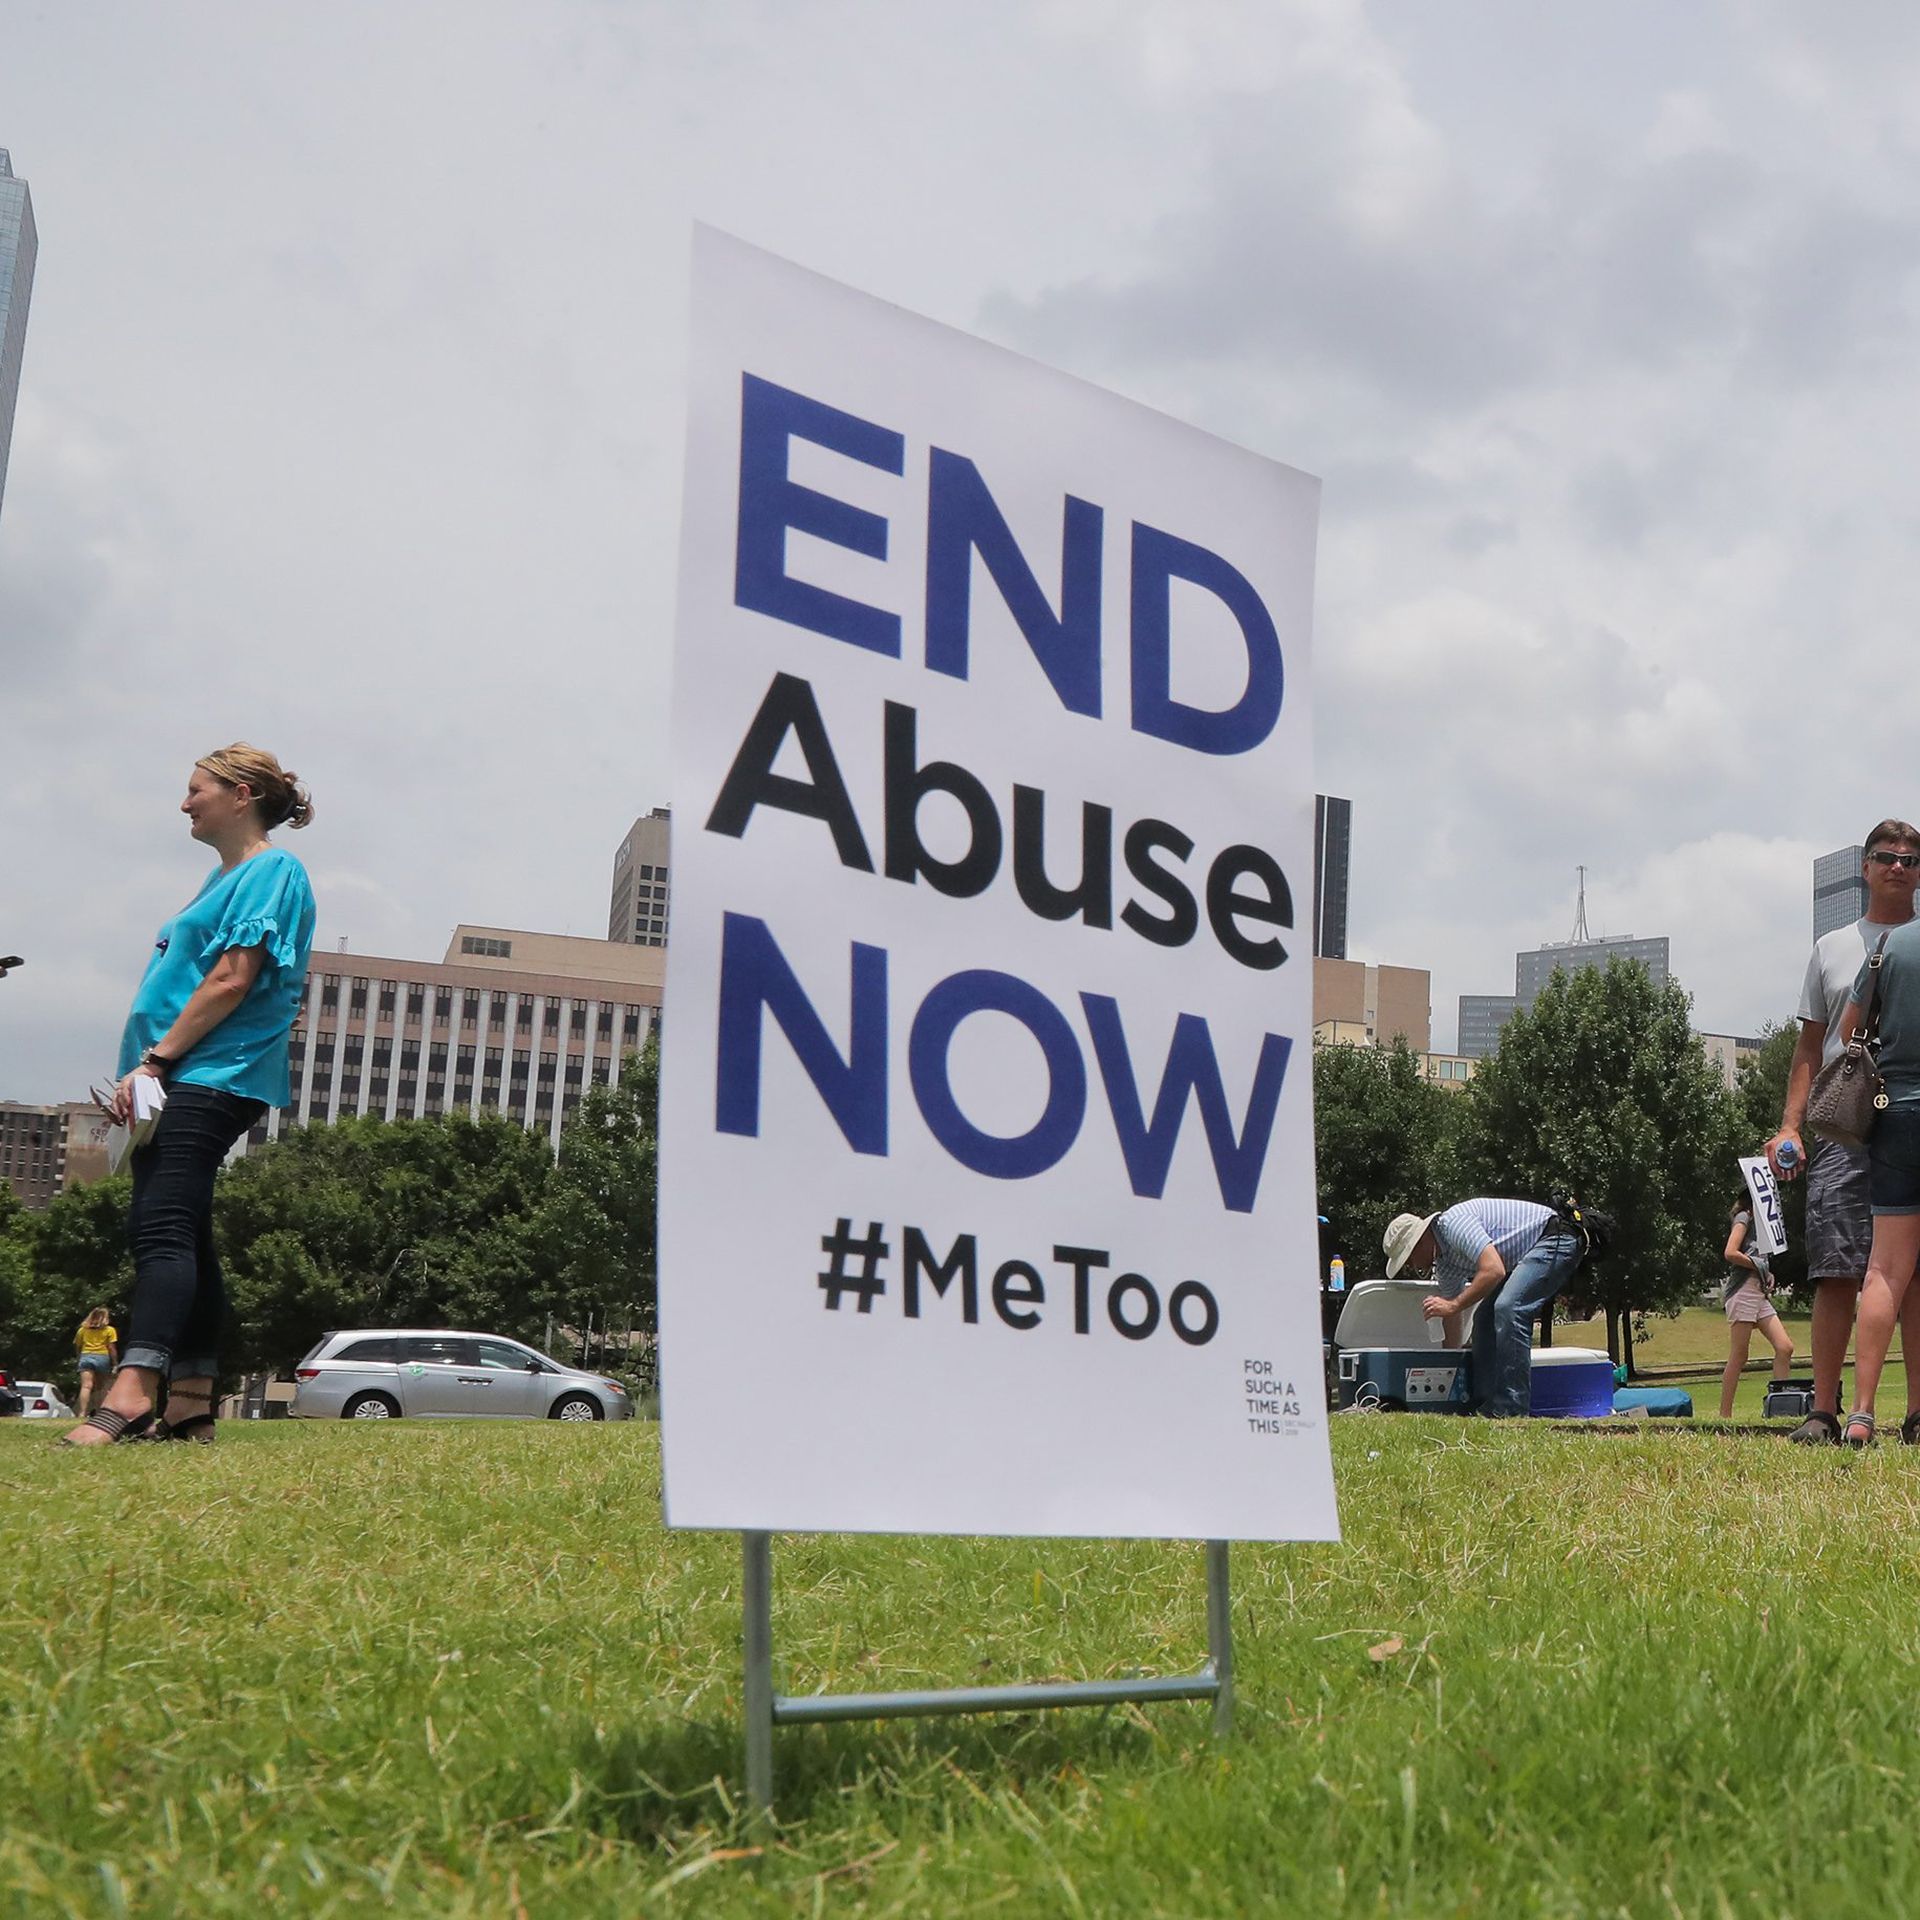 Photo of a sign that says "End Abuse Now #MeToo" embedded in grass with people standing around